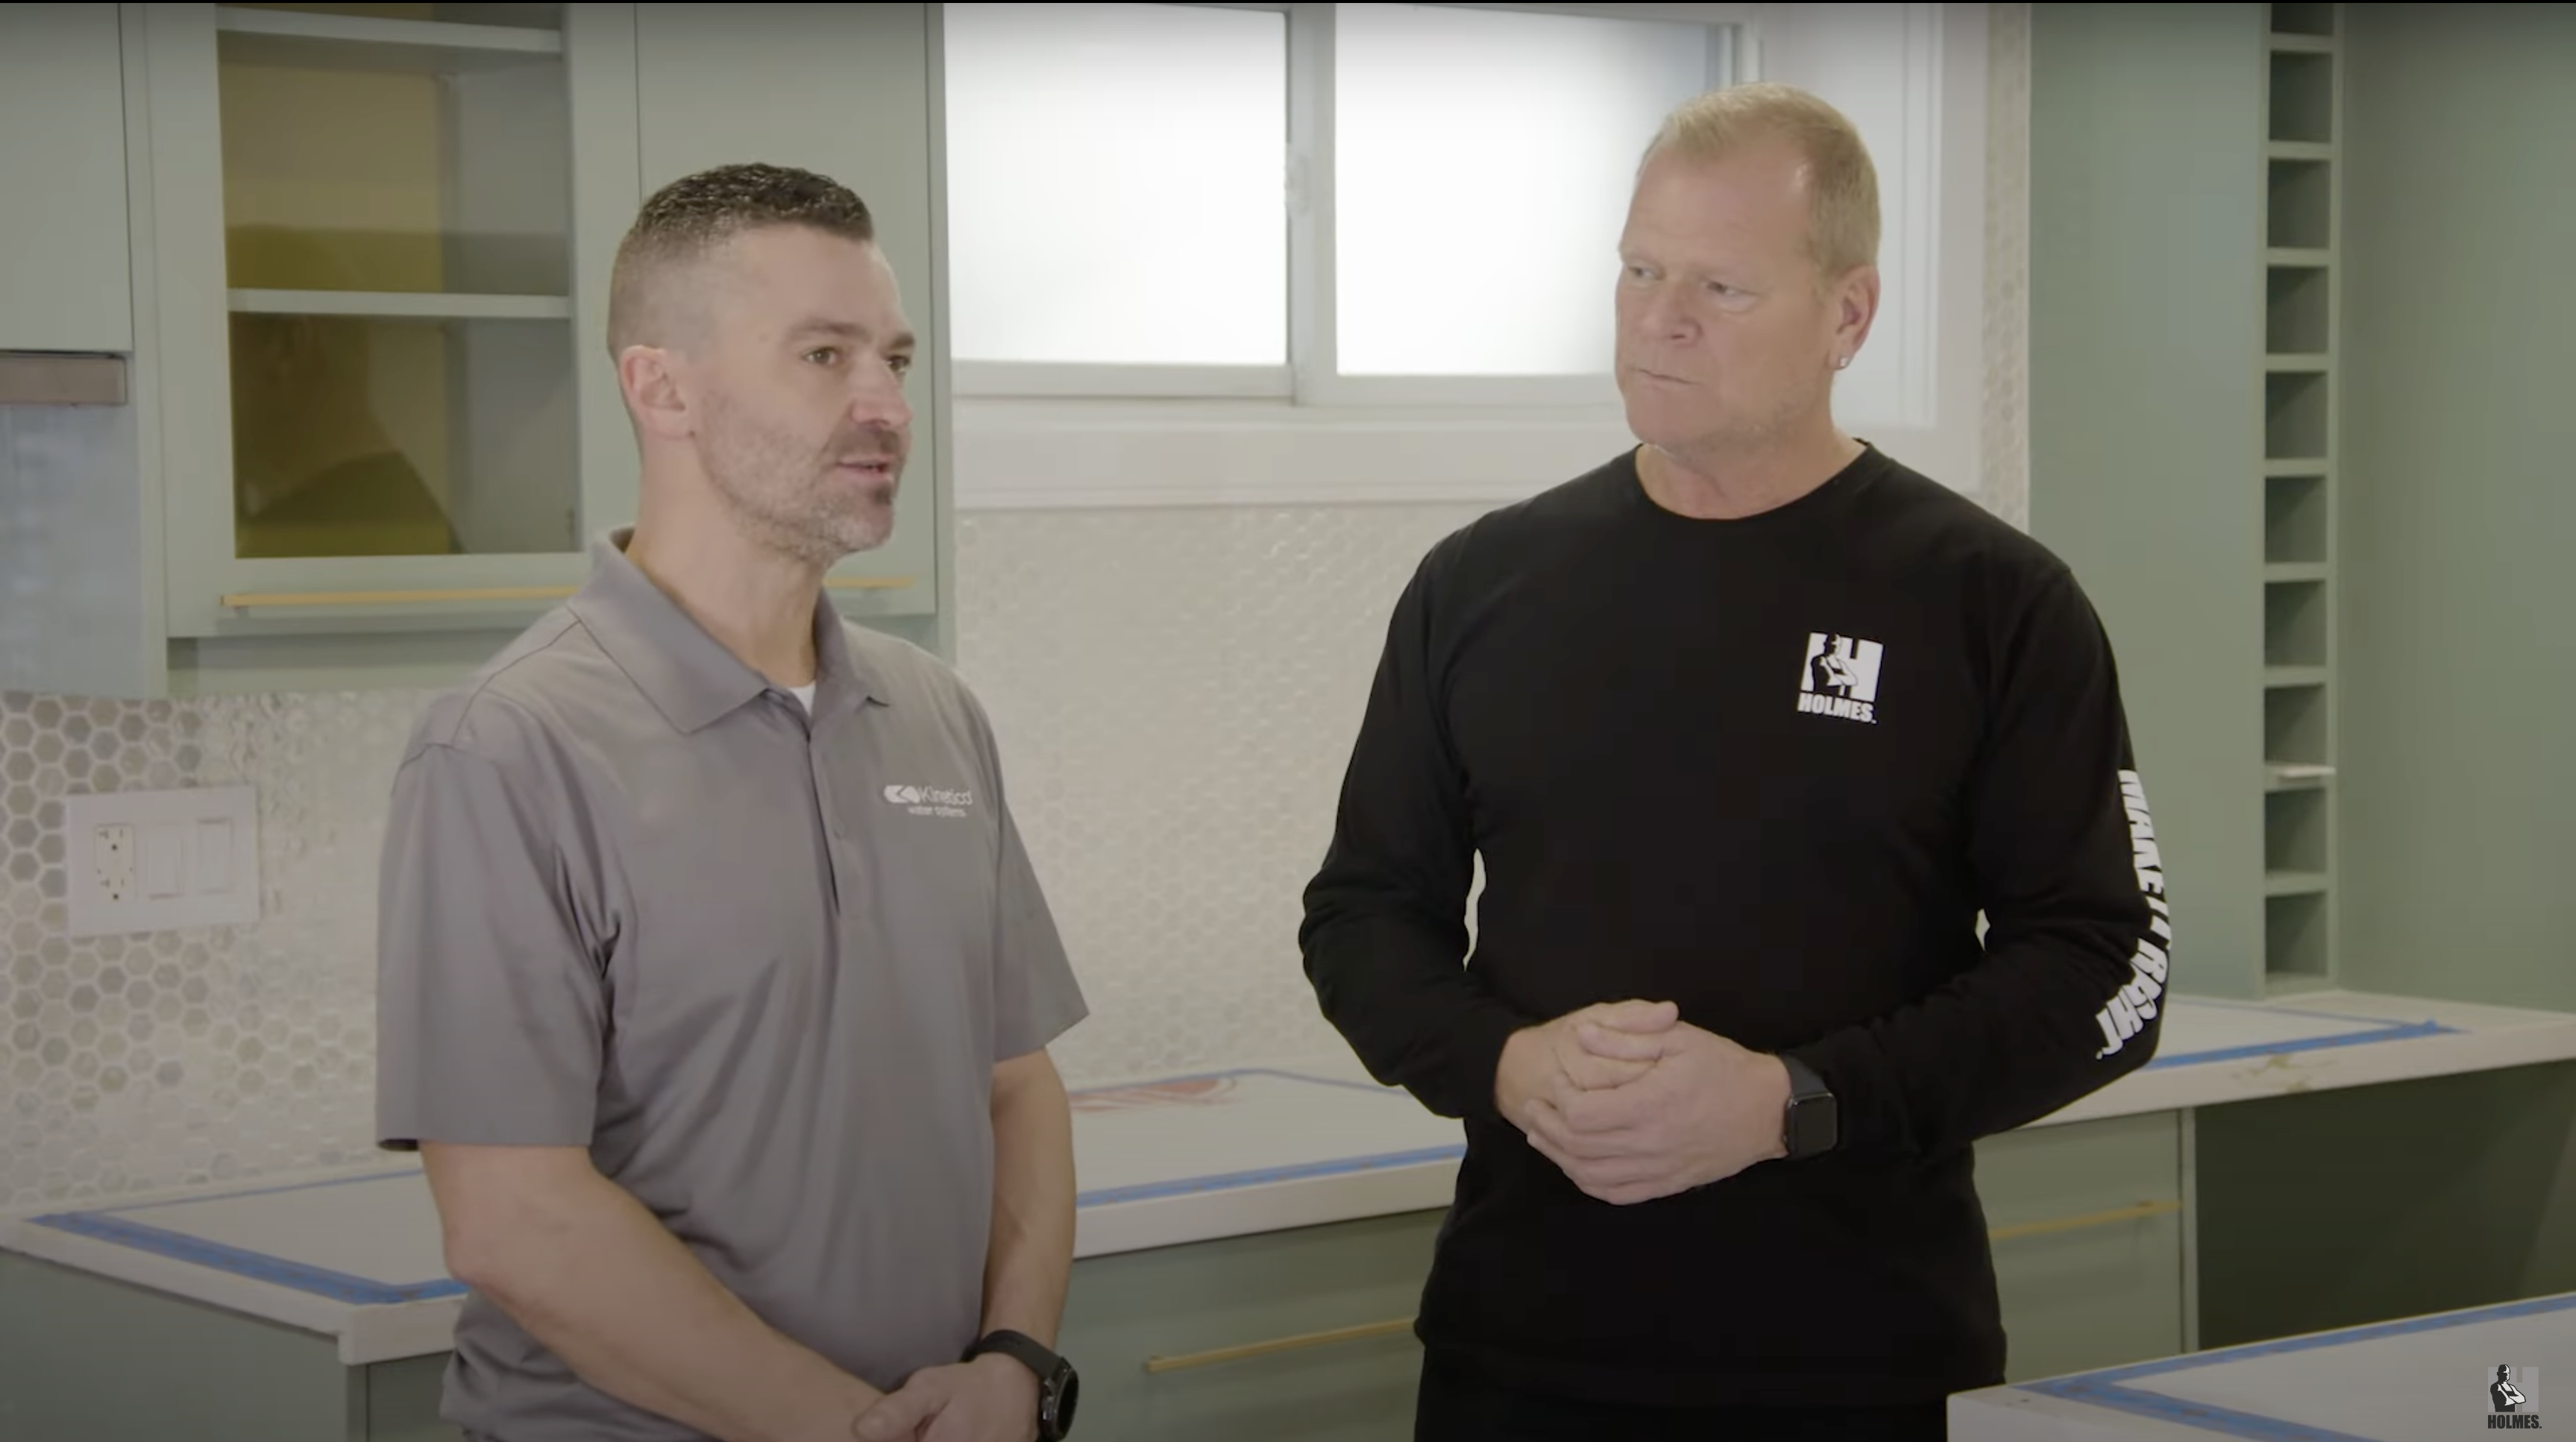 Video of Kinetico and Mike Holmes about water